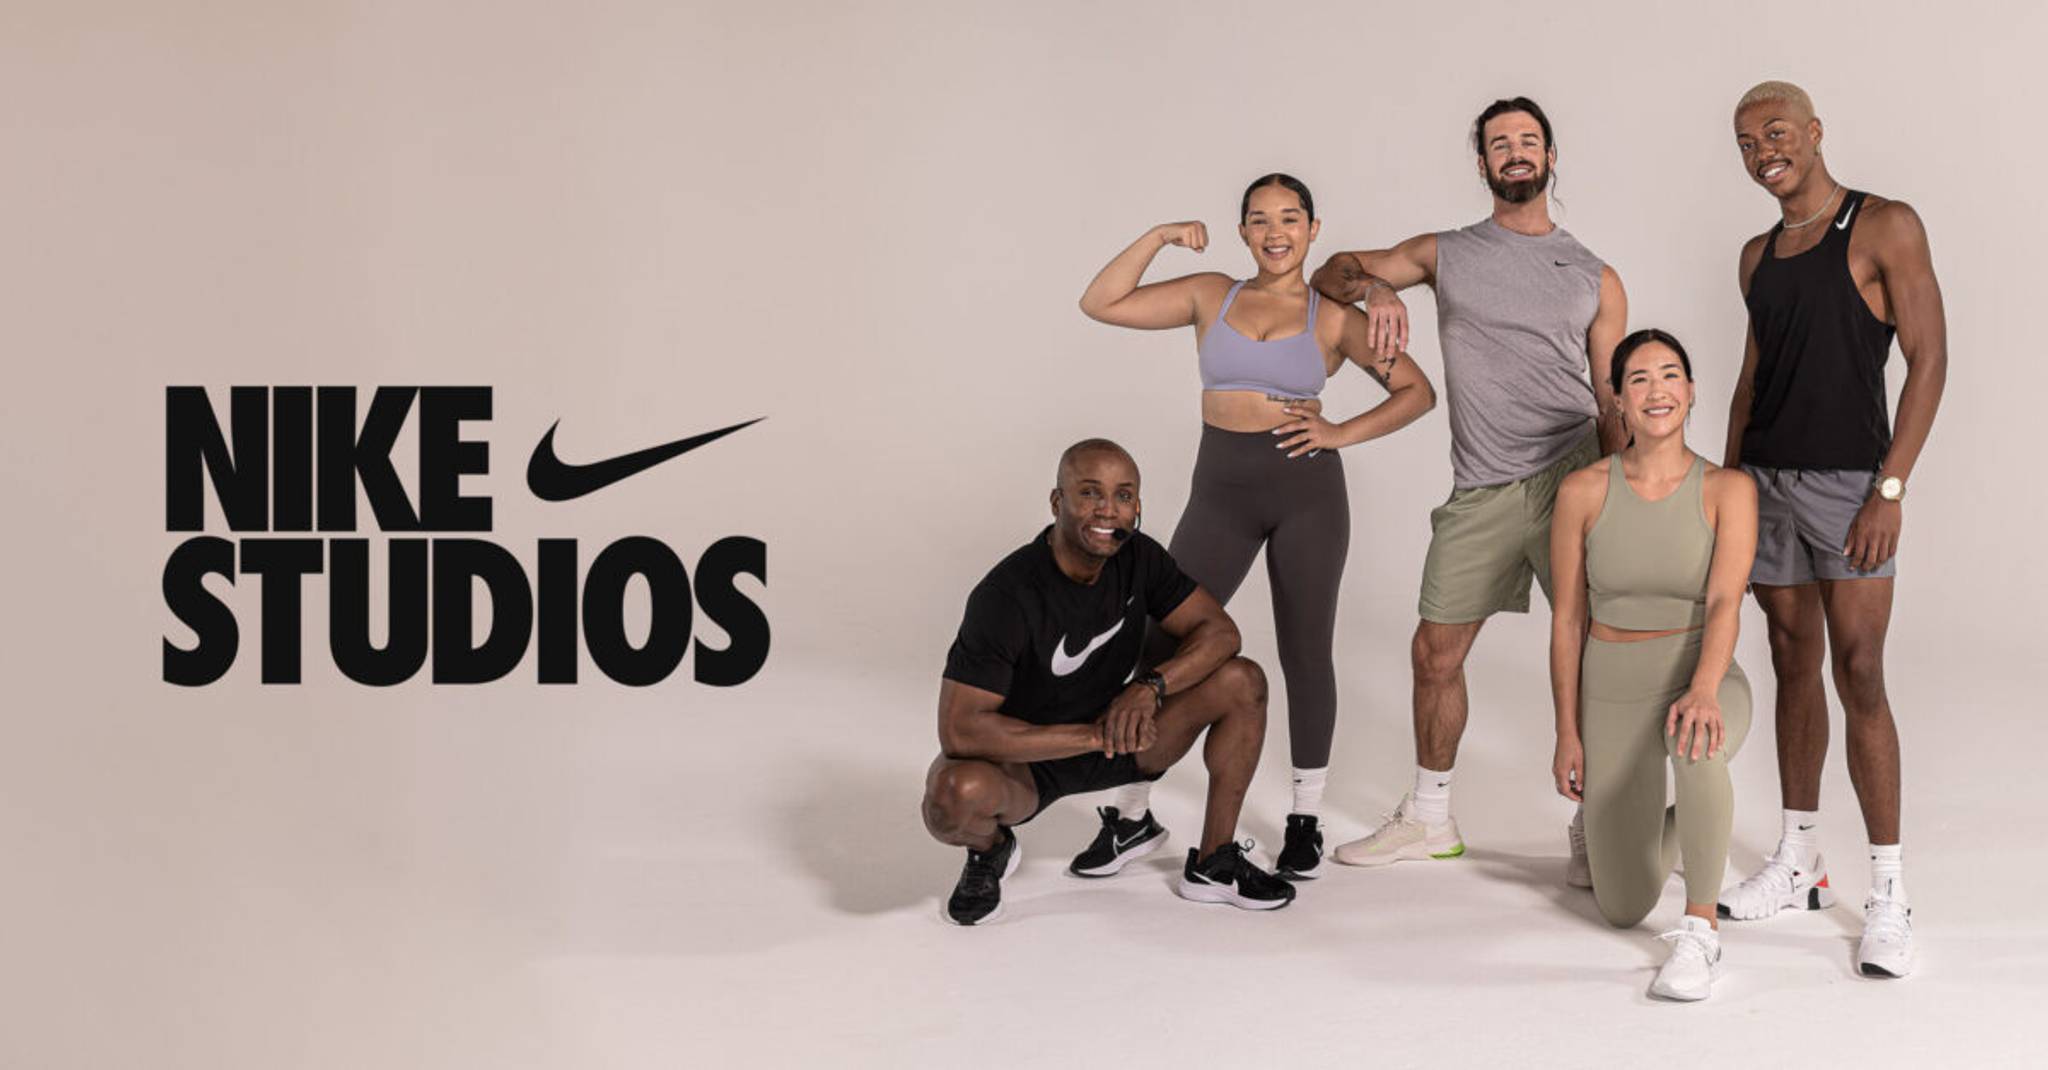 Nike Studios meets needs for physical and social health